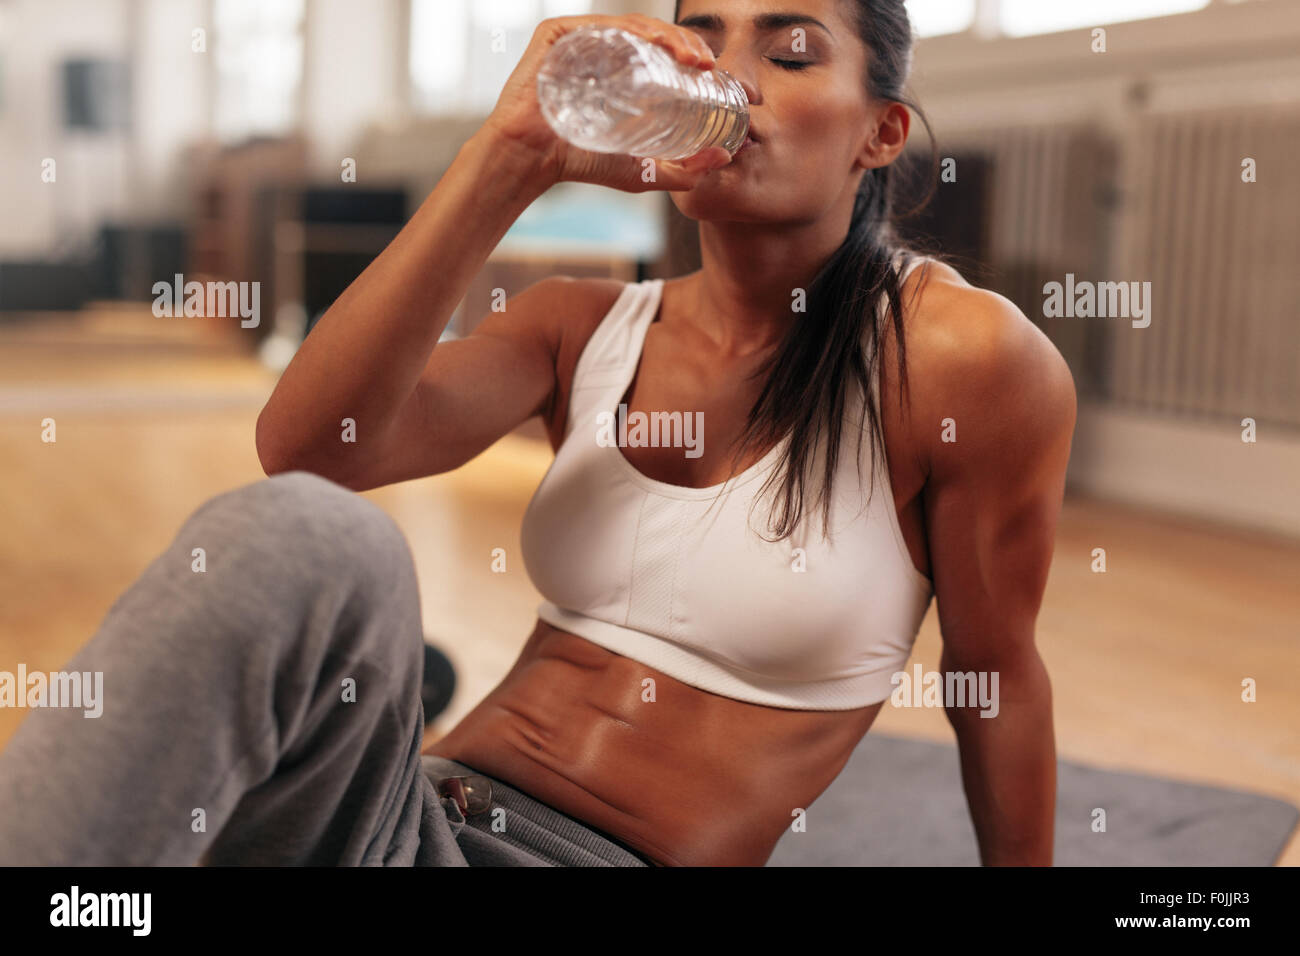 Fitness woman drinking water from bottle. Muscular young female at gym taking a break from workout. Stock Photo